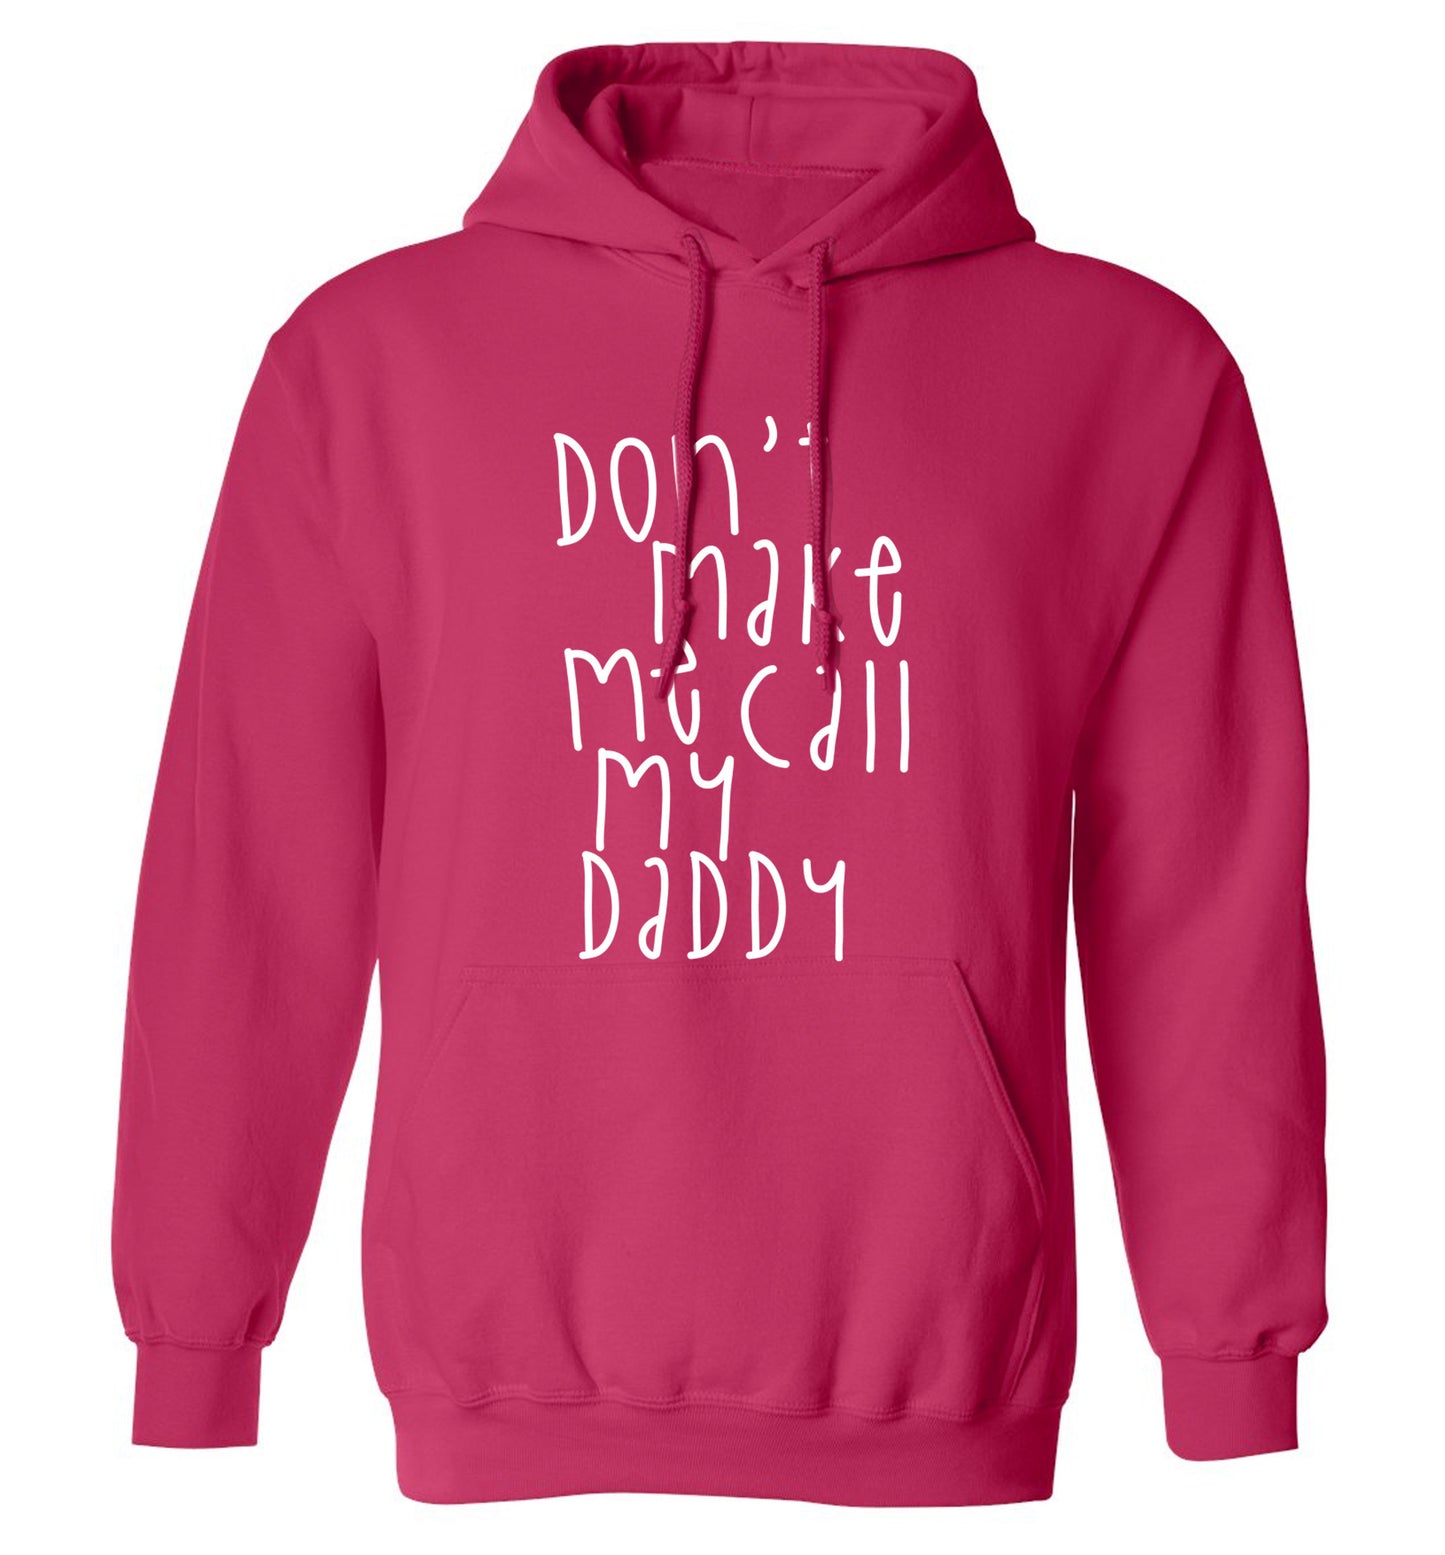 Don't make me call my daddy adults unisex pink hoodie 2XL